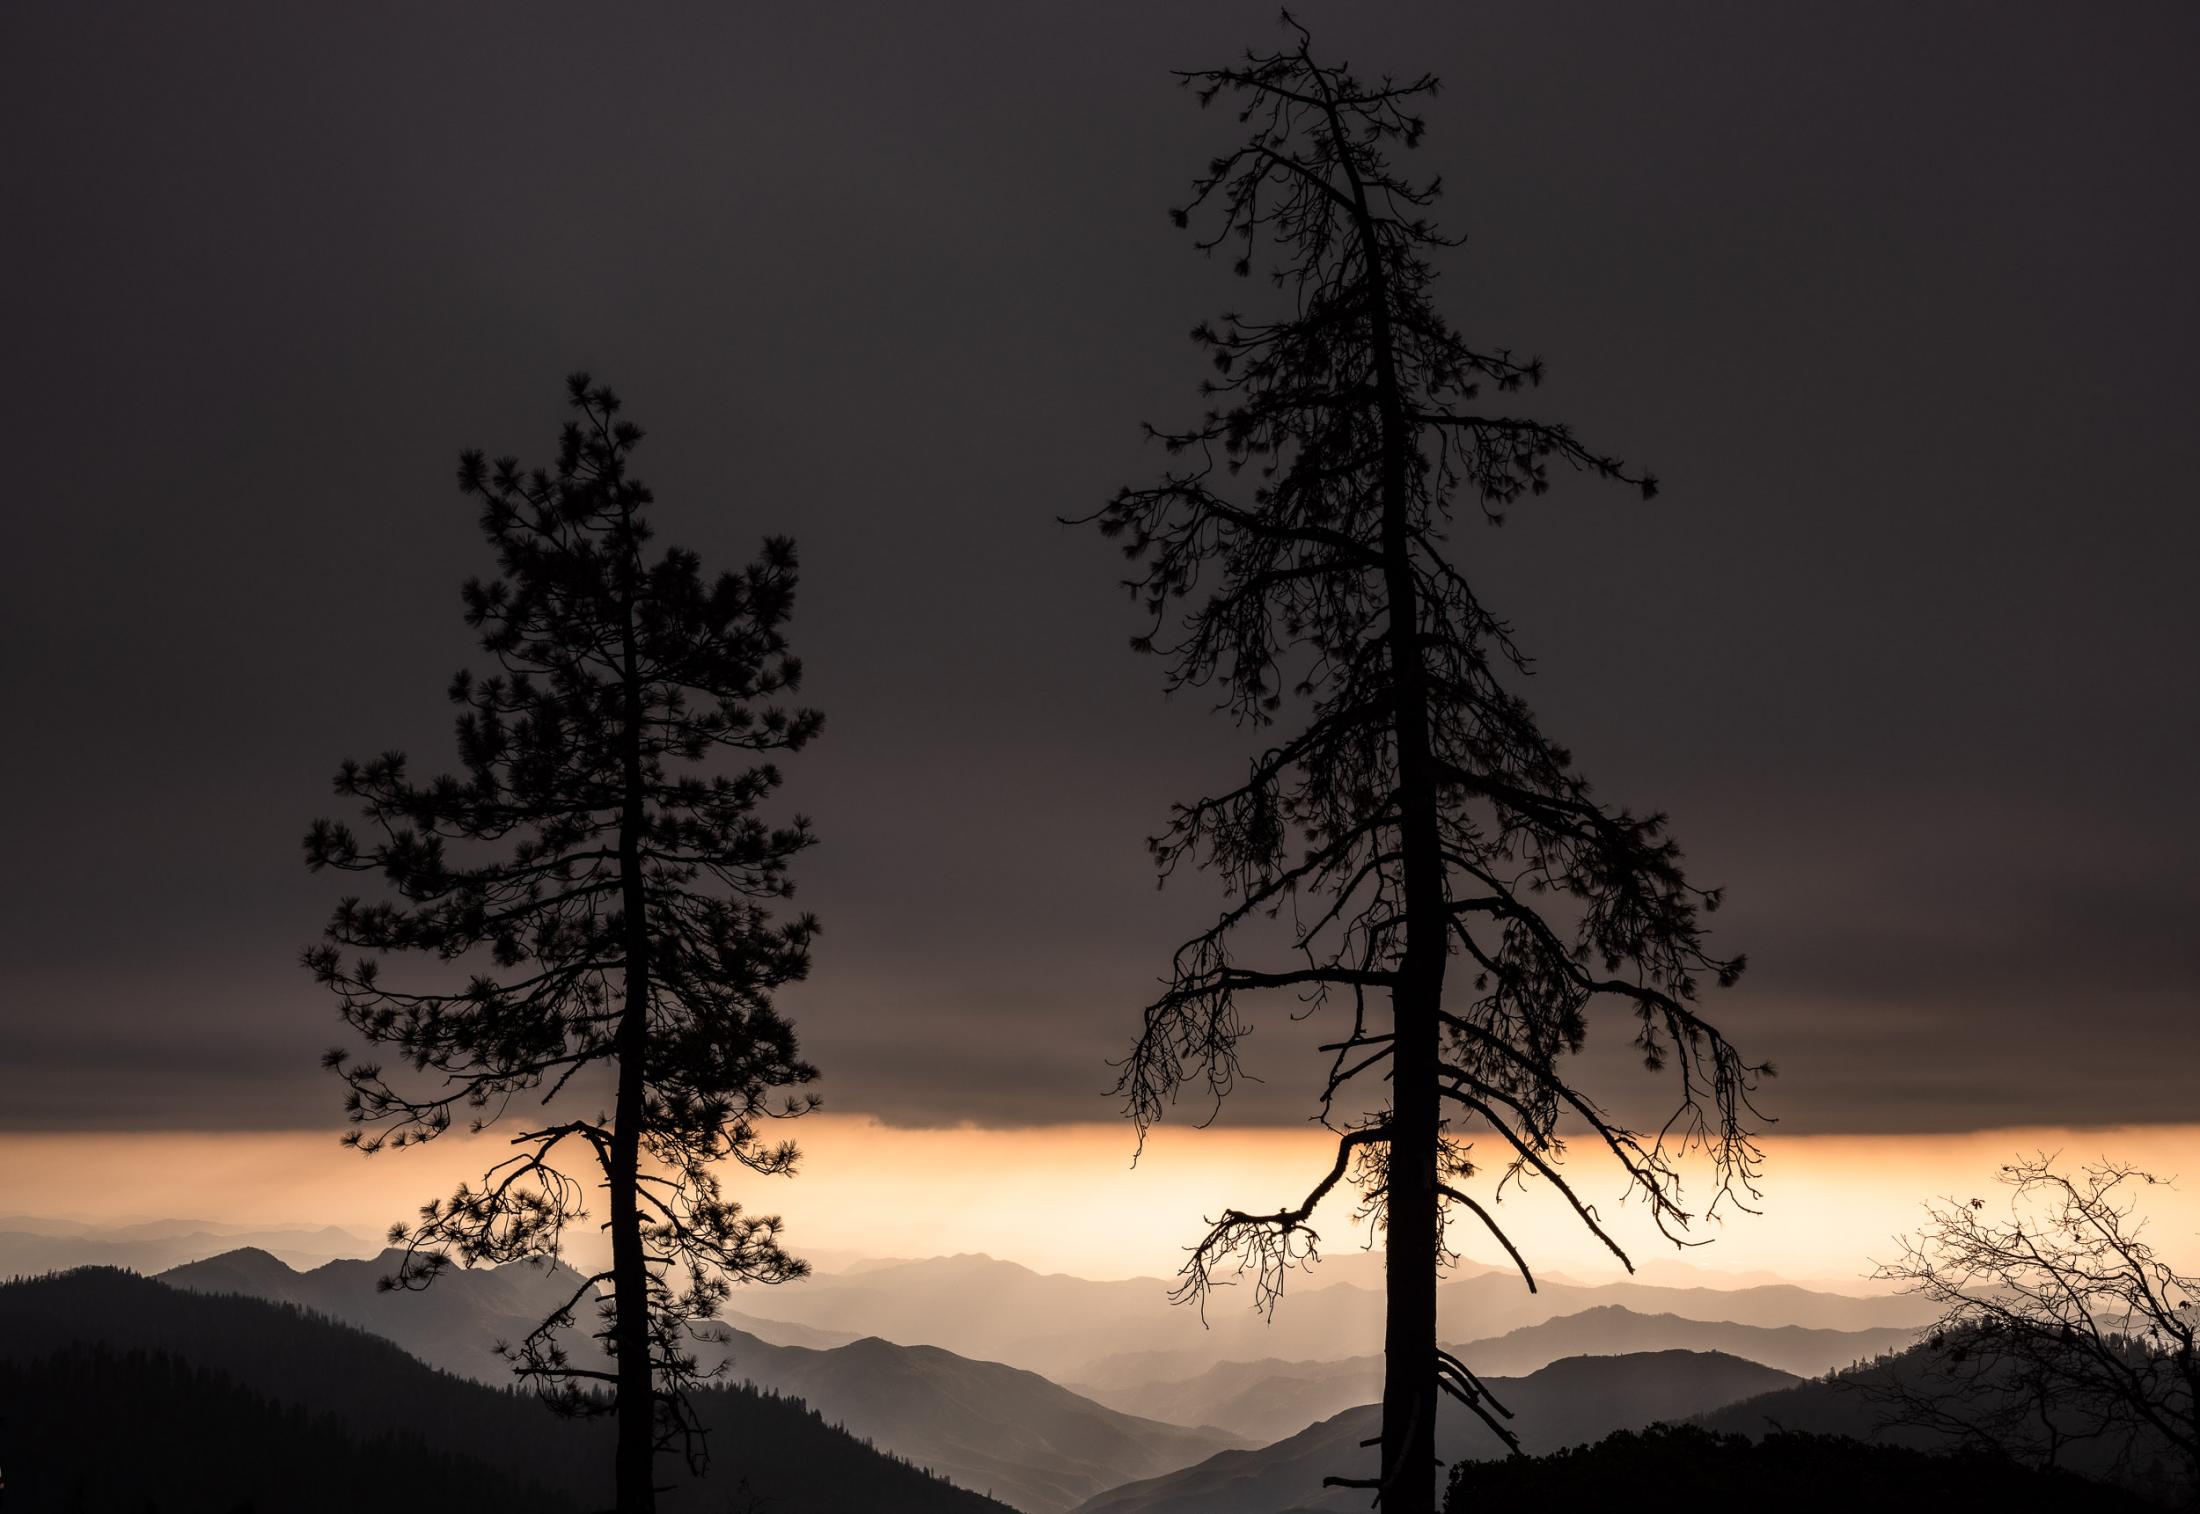 Earth Day Print Sale - 8. Sequoia and kinds canyon national park. Nov 2019